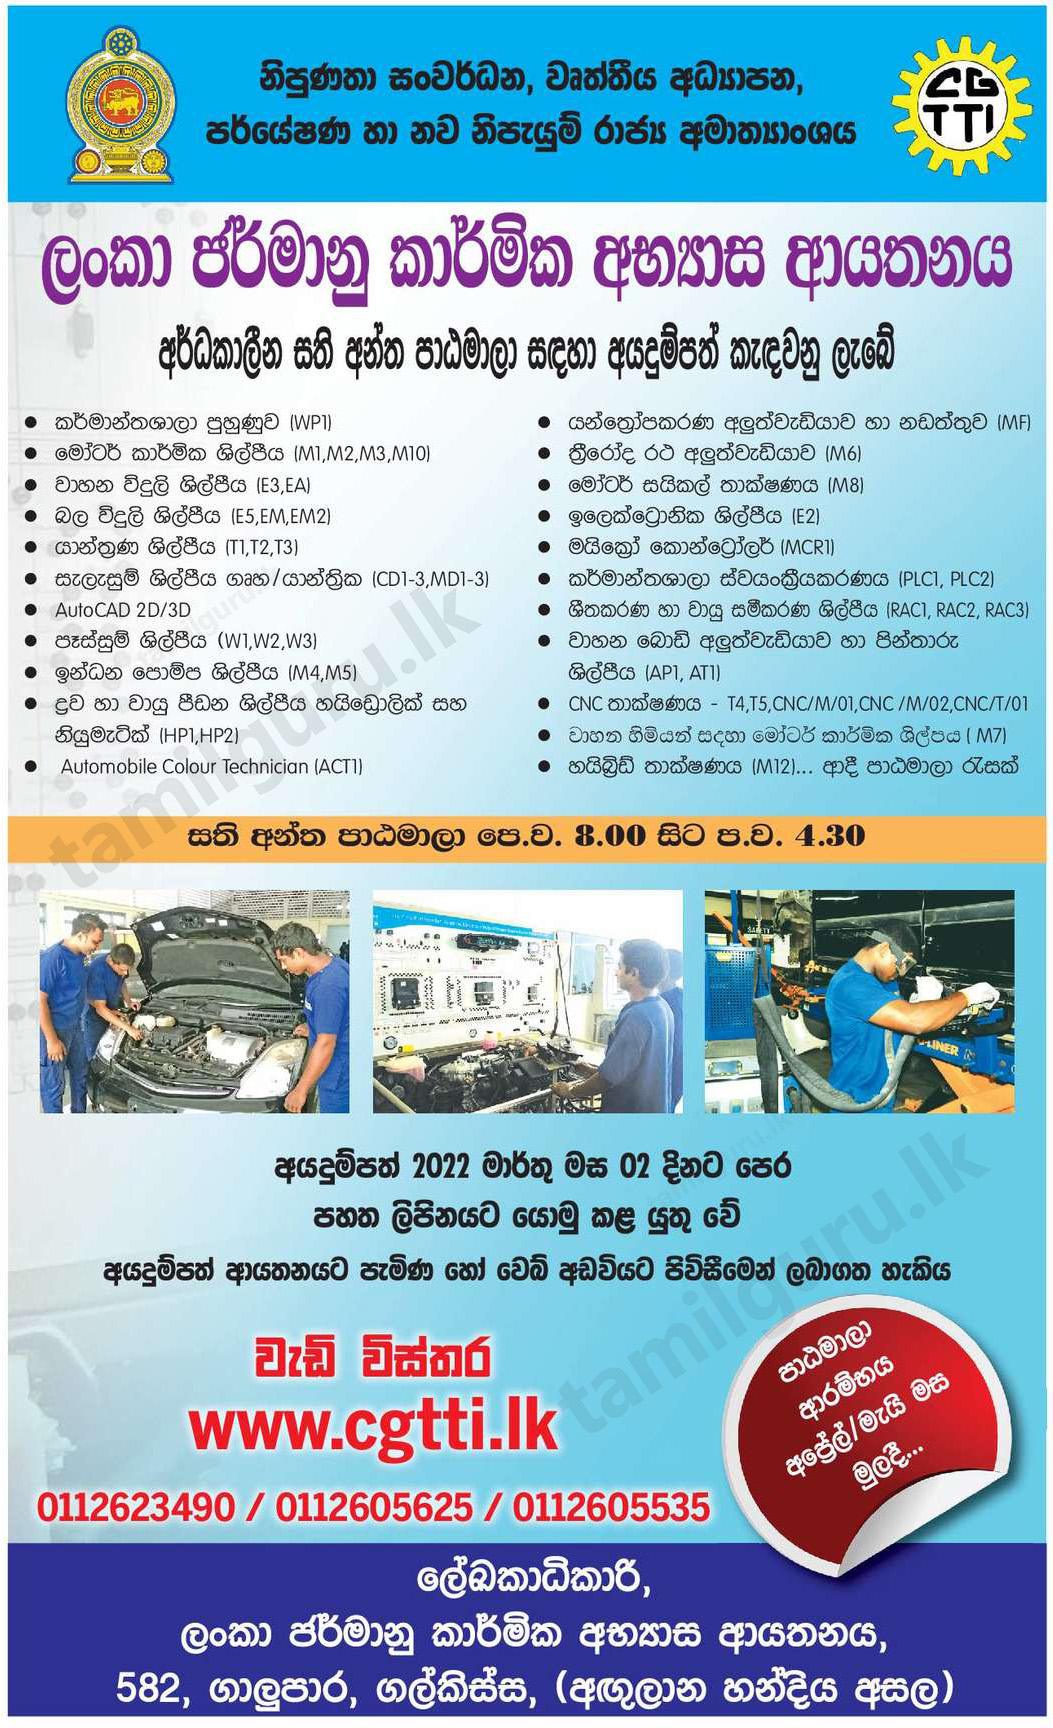 Calling Applications for Part-Time (Weekend) Courses Conducted by Ceylon - German Technical Training Institute (CGTTI) (German Tech) - 2022